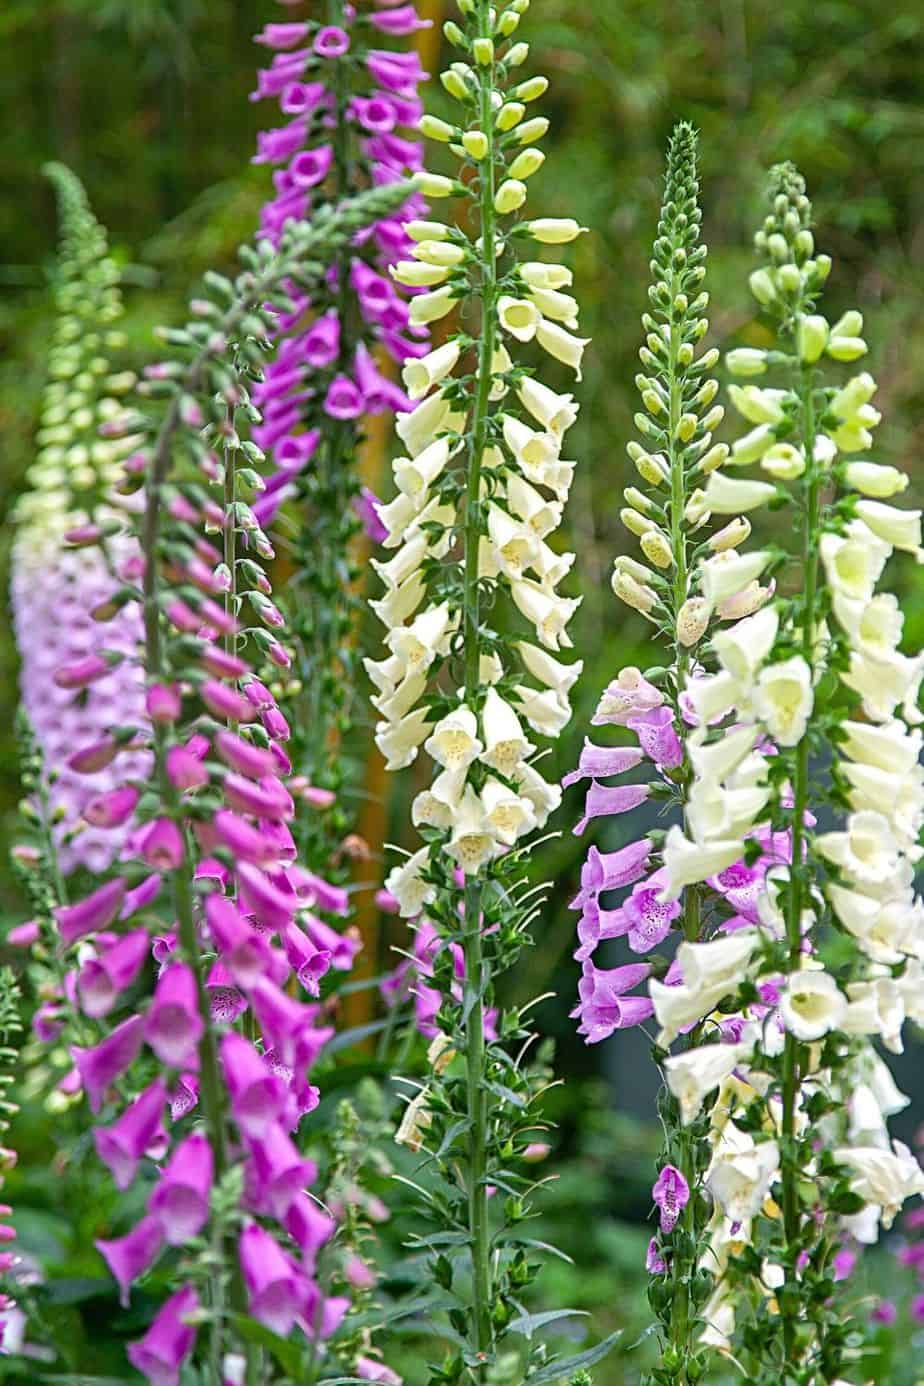 Aka Foxglove, Digitalis can thrive in full or partial shade conditions of the north-facing side of the house